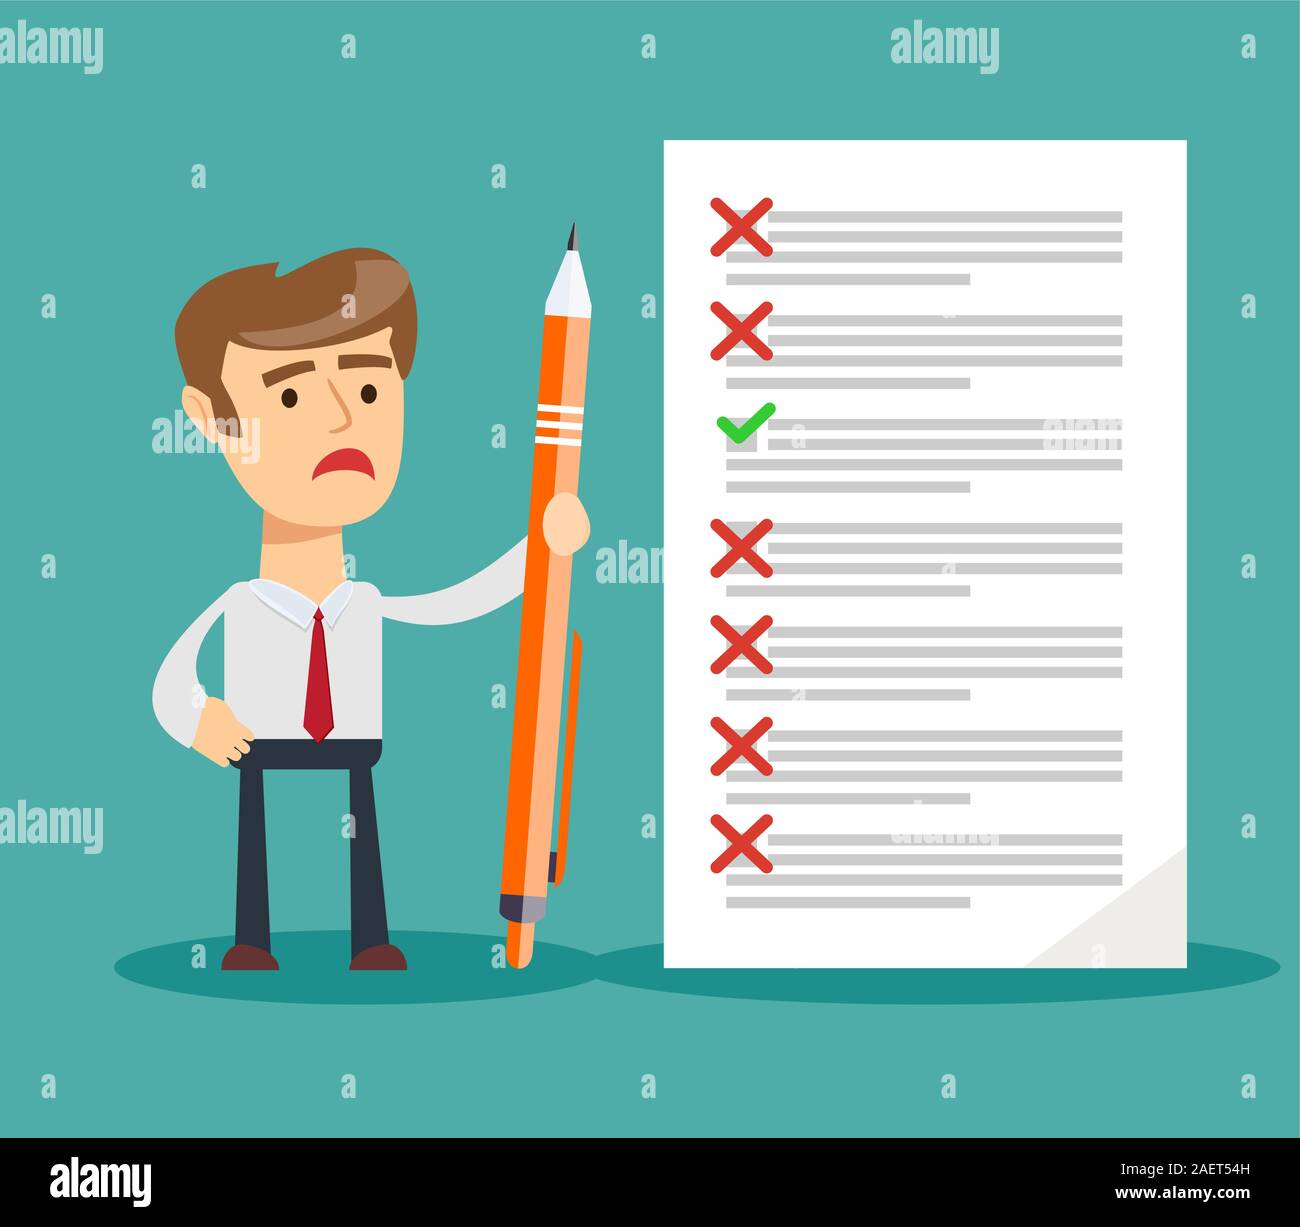 Sad businessman holding a pencil looking at checklist on clipboard. Stock Vector